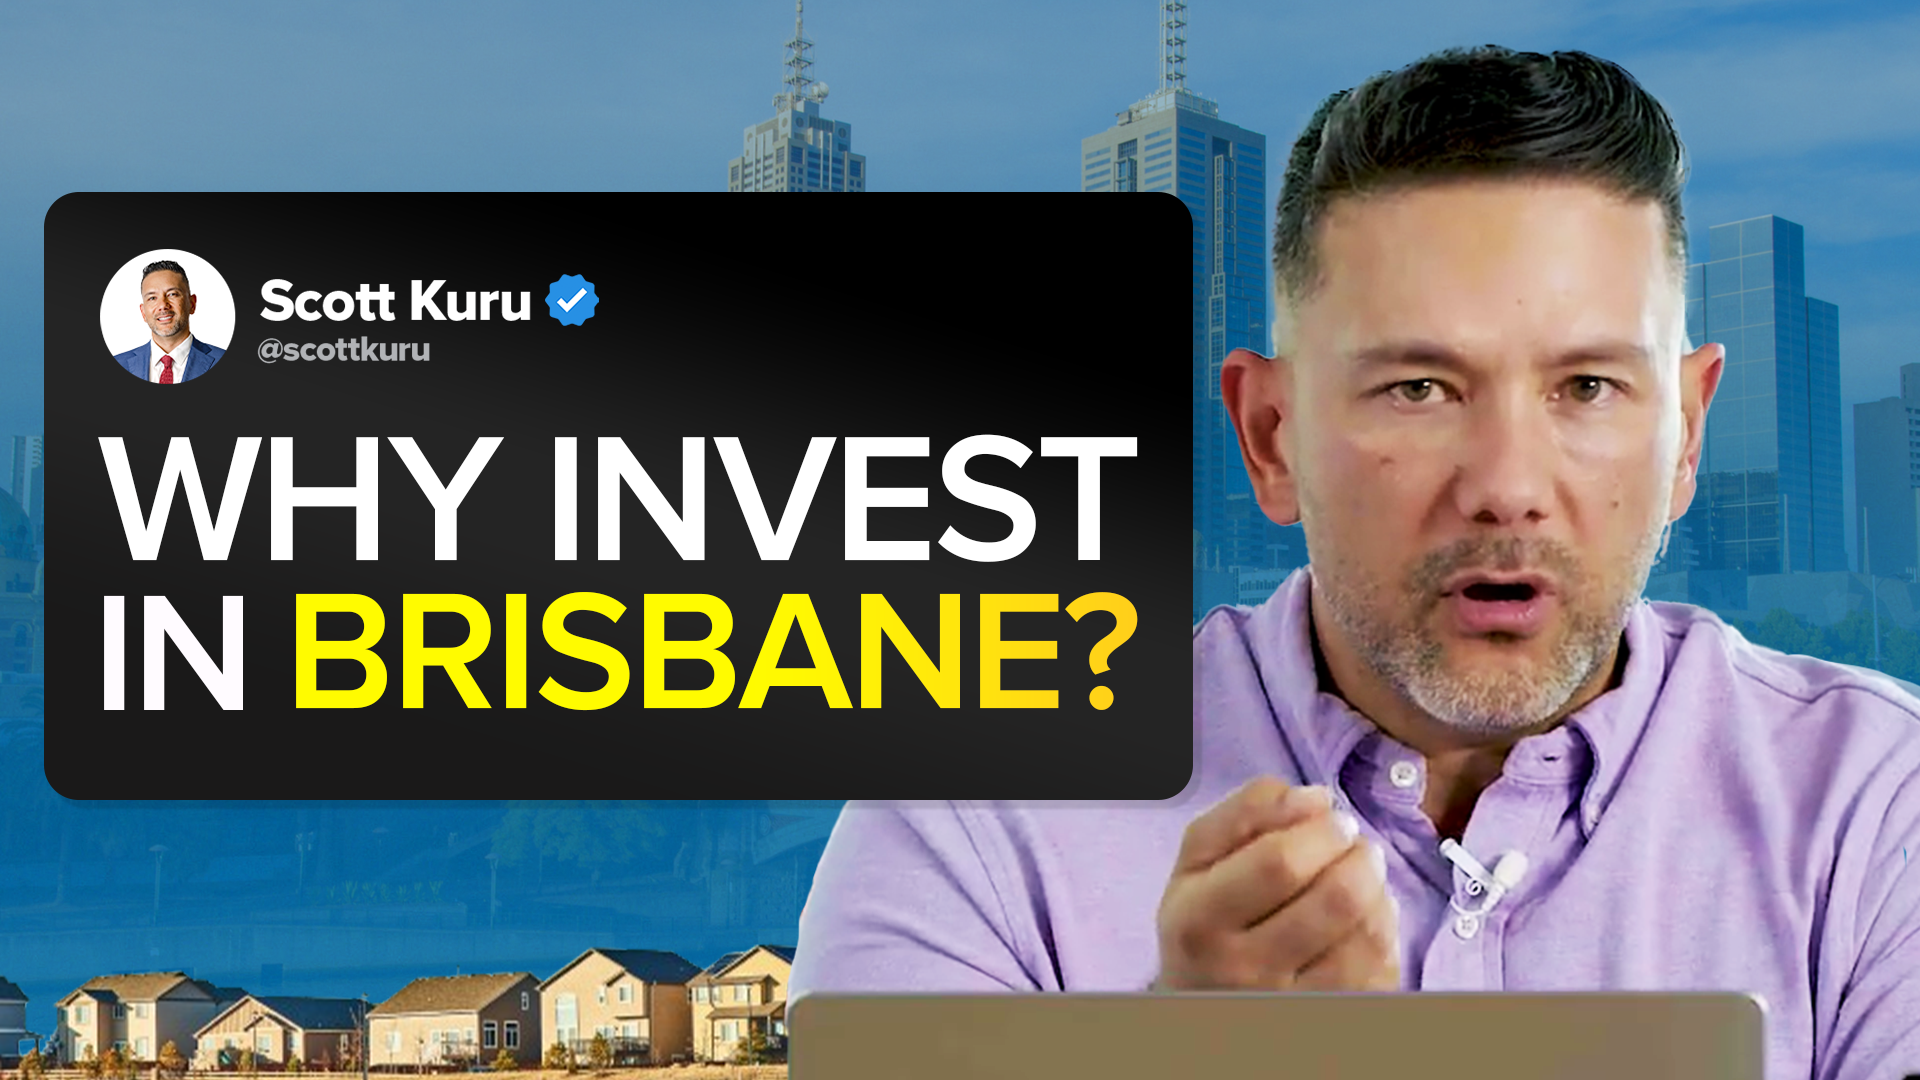 Andre_Why Invest in Brisbane_YT Thumbnail